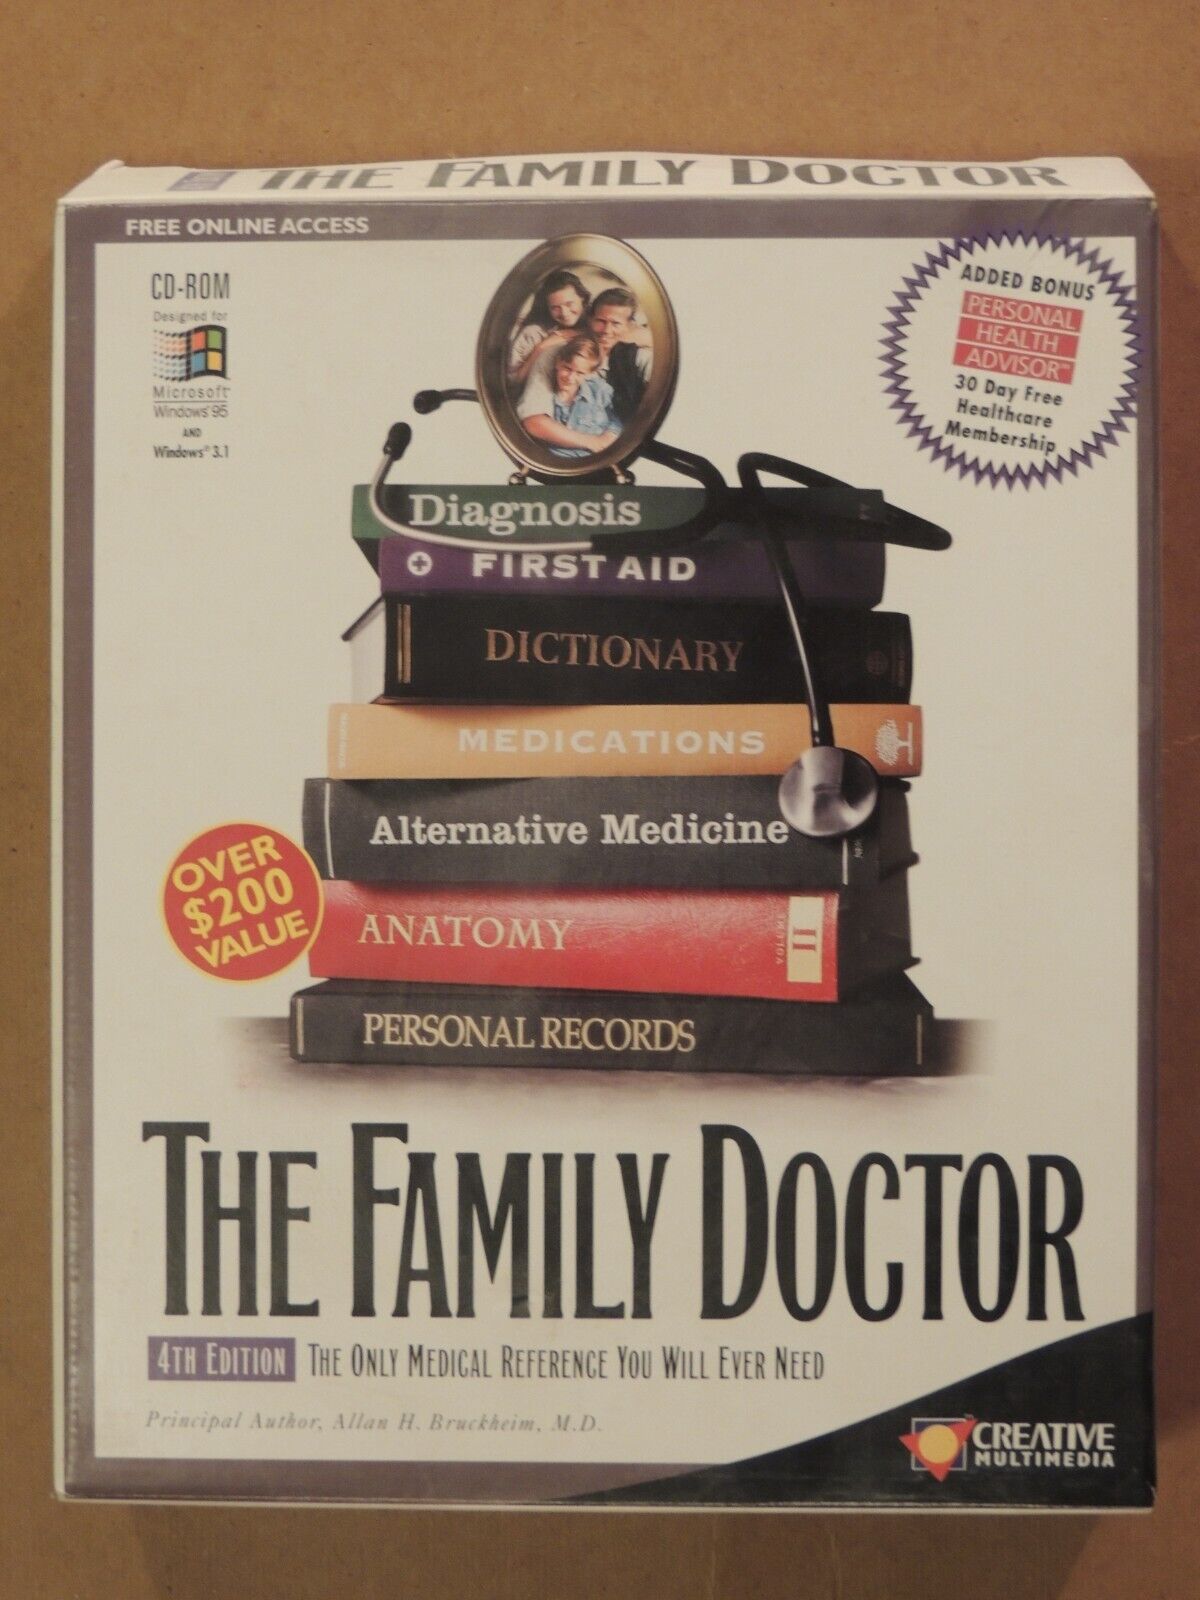 The Family Doctor 4th Edition CD-ROM for Windows 1996